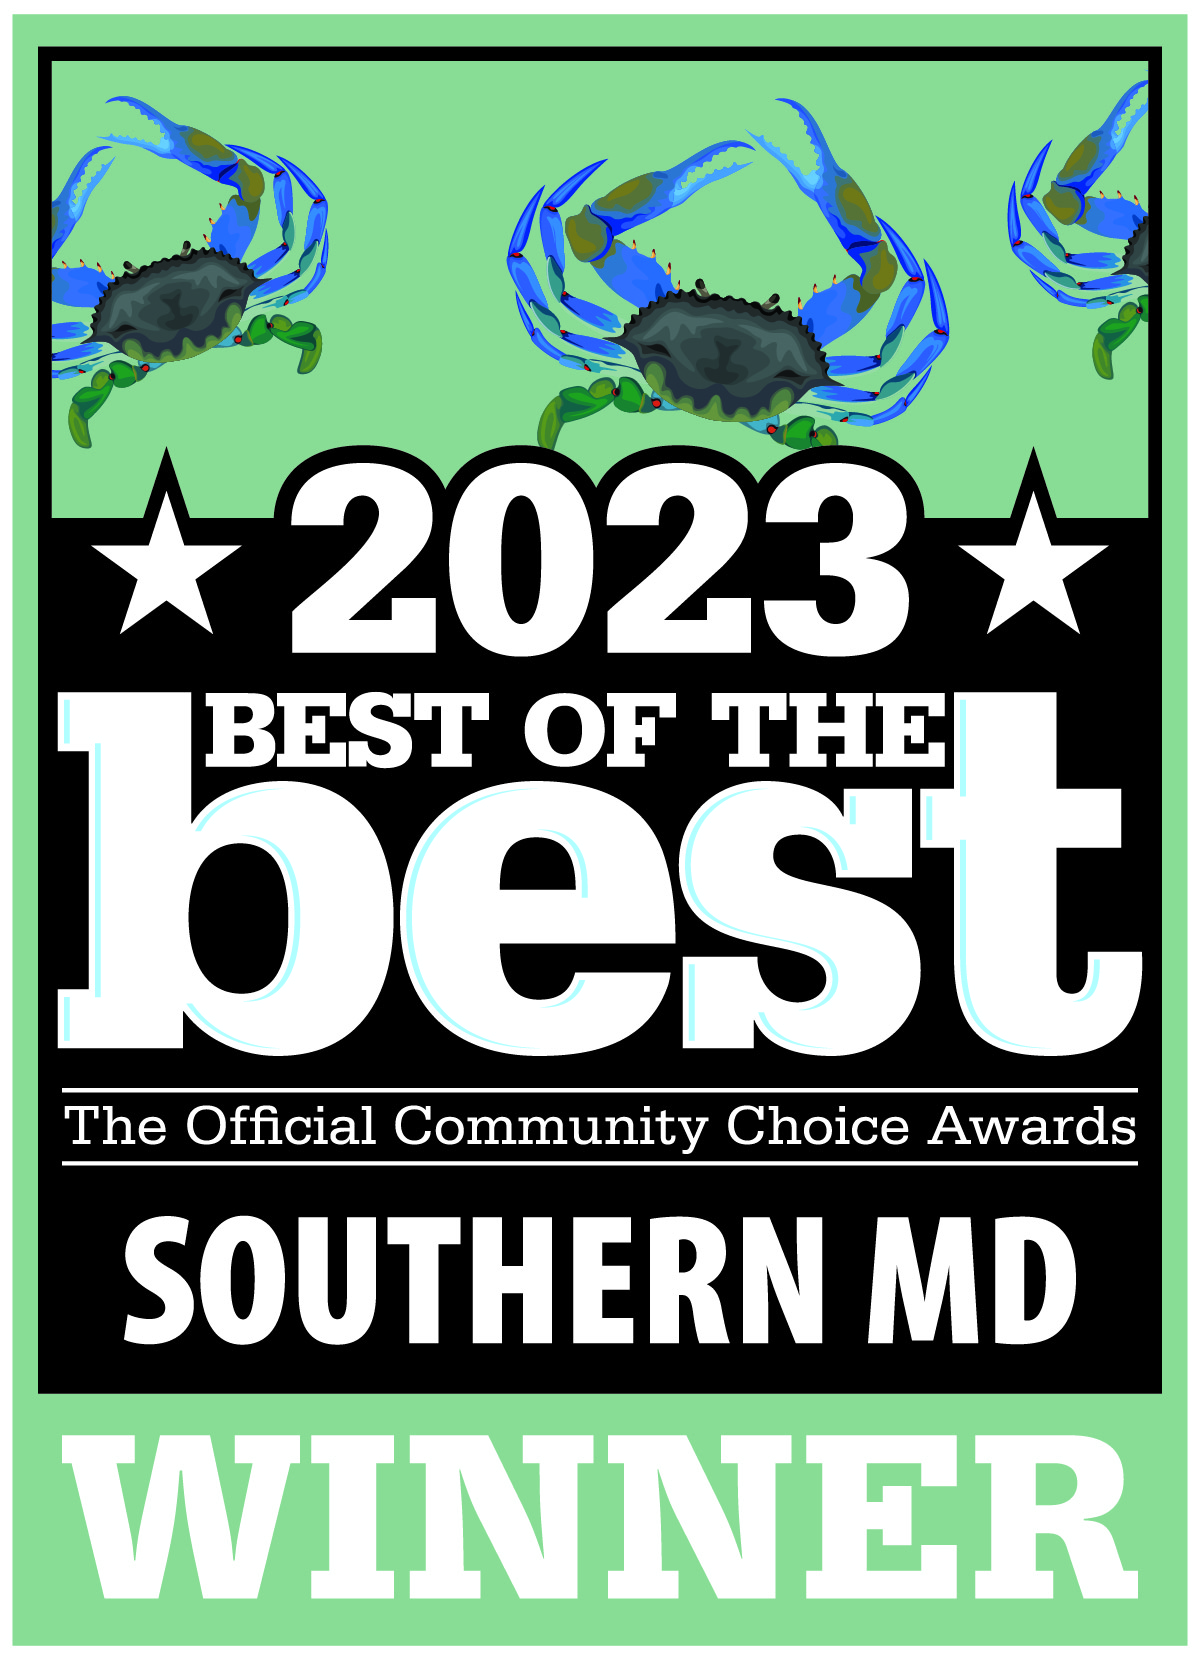 2023 Best of the Best Southern MD Winner - The Official Community Choice Awards